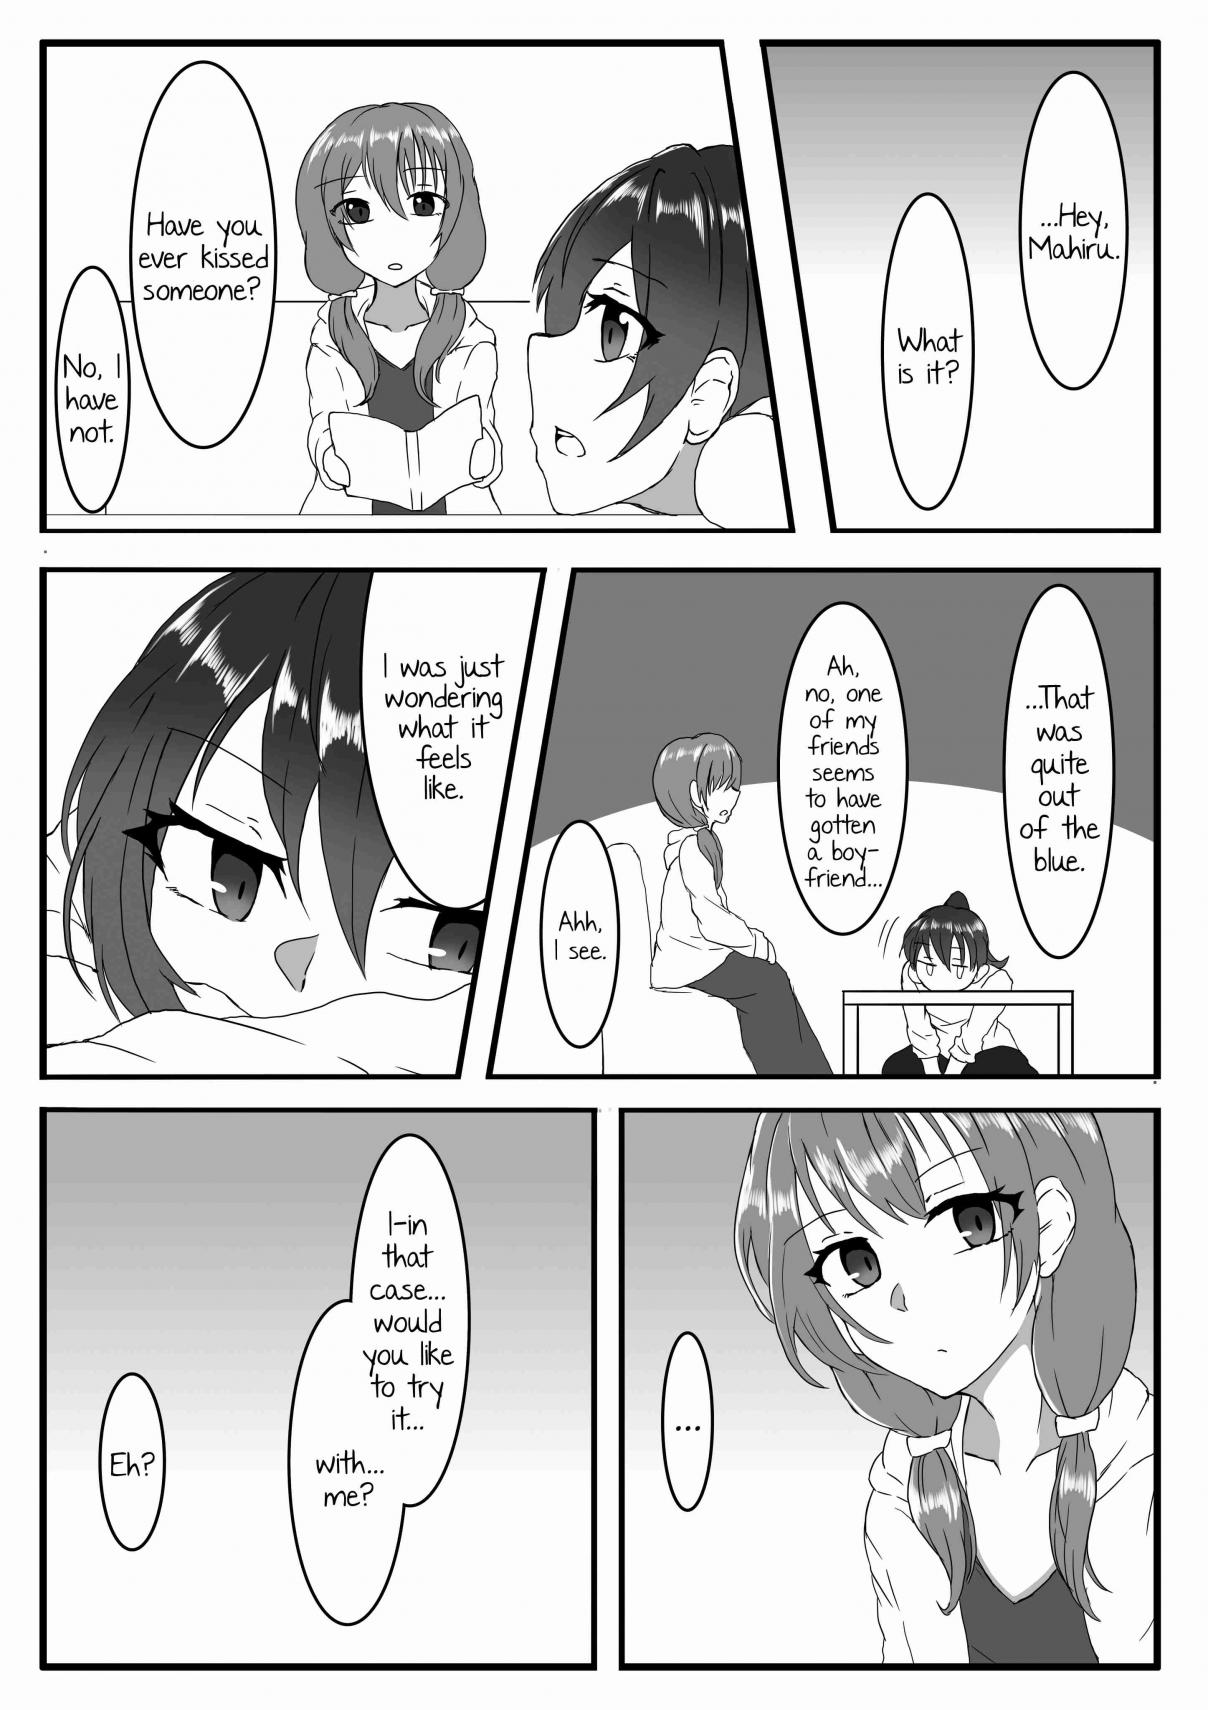 Yuri Manga about a pair of sisters who kissed and didn't feel awkward Oneshot